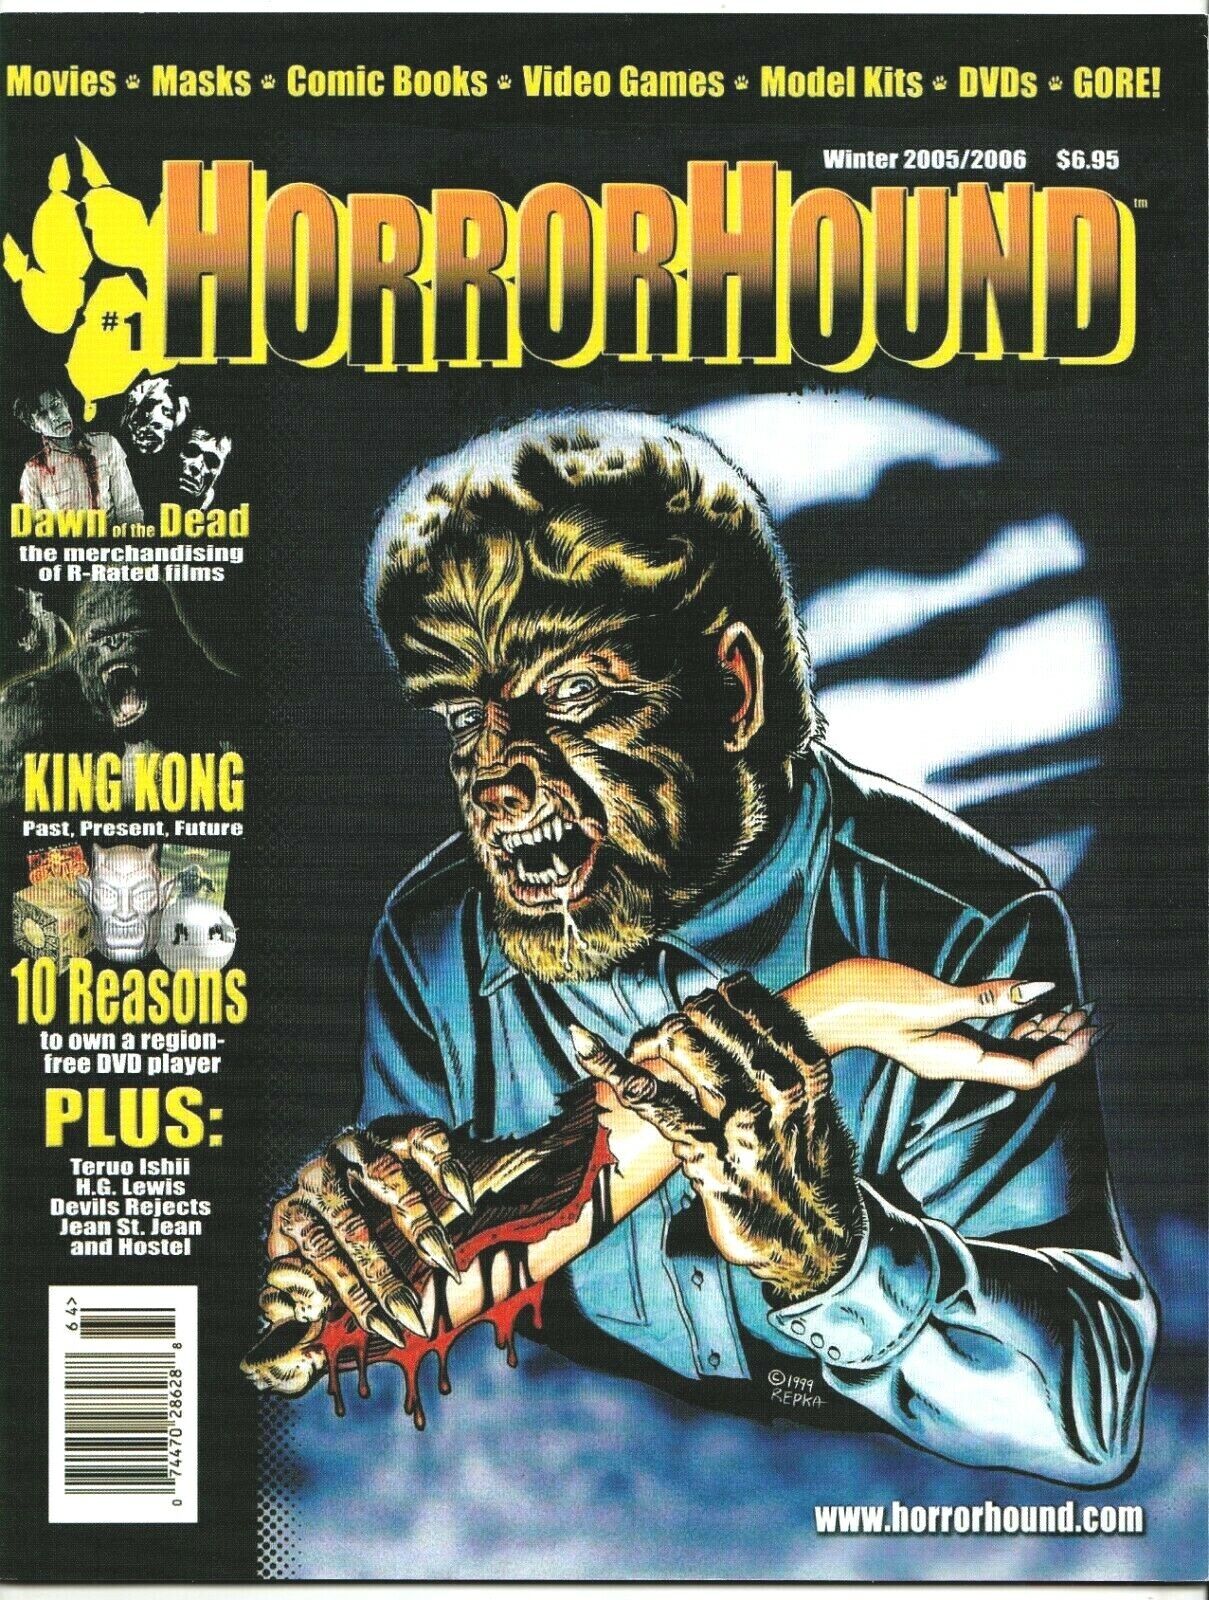 HORRORHOUND MAGAZINE ISSUES #1 - 30 & SPECIALS NEW UNREAD COPIES - YOU PICK